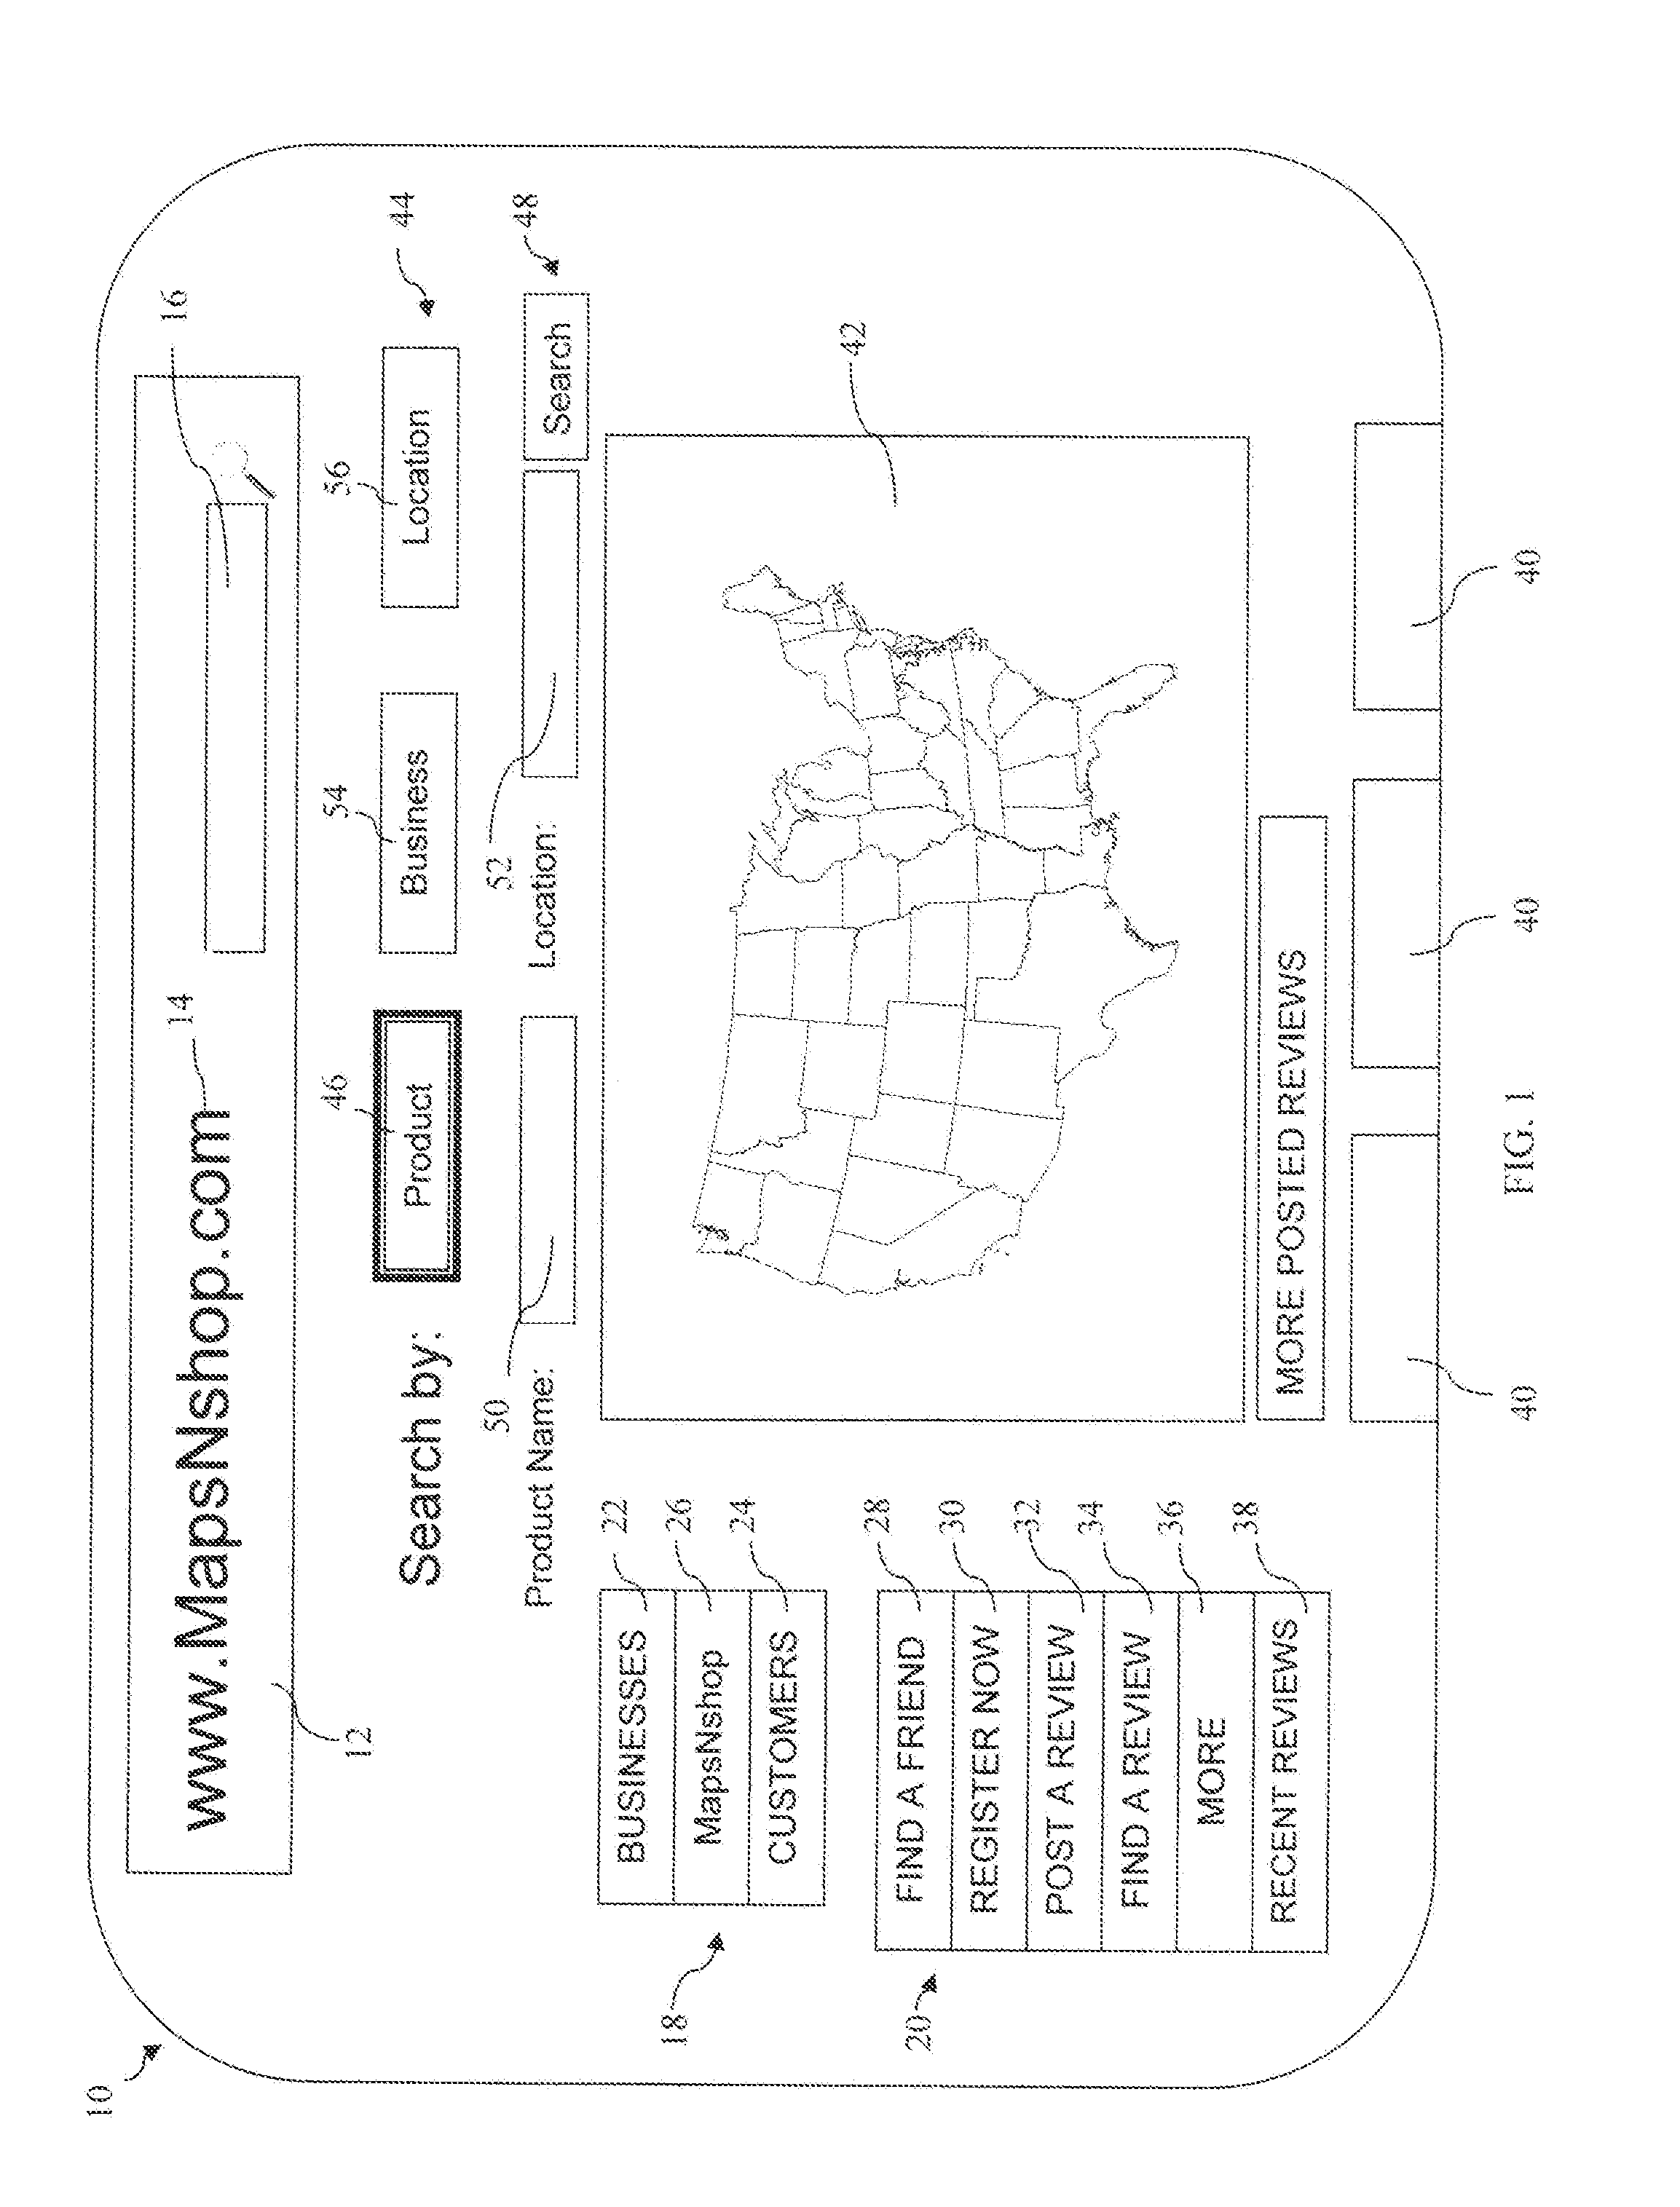 Systems and methods for online matching of consumers and retailers